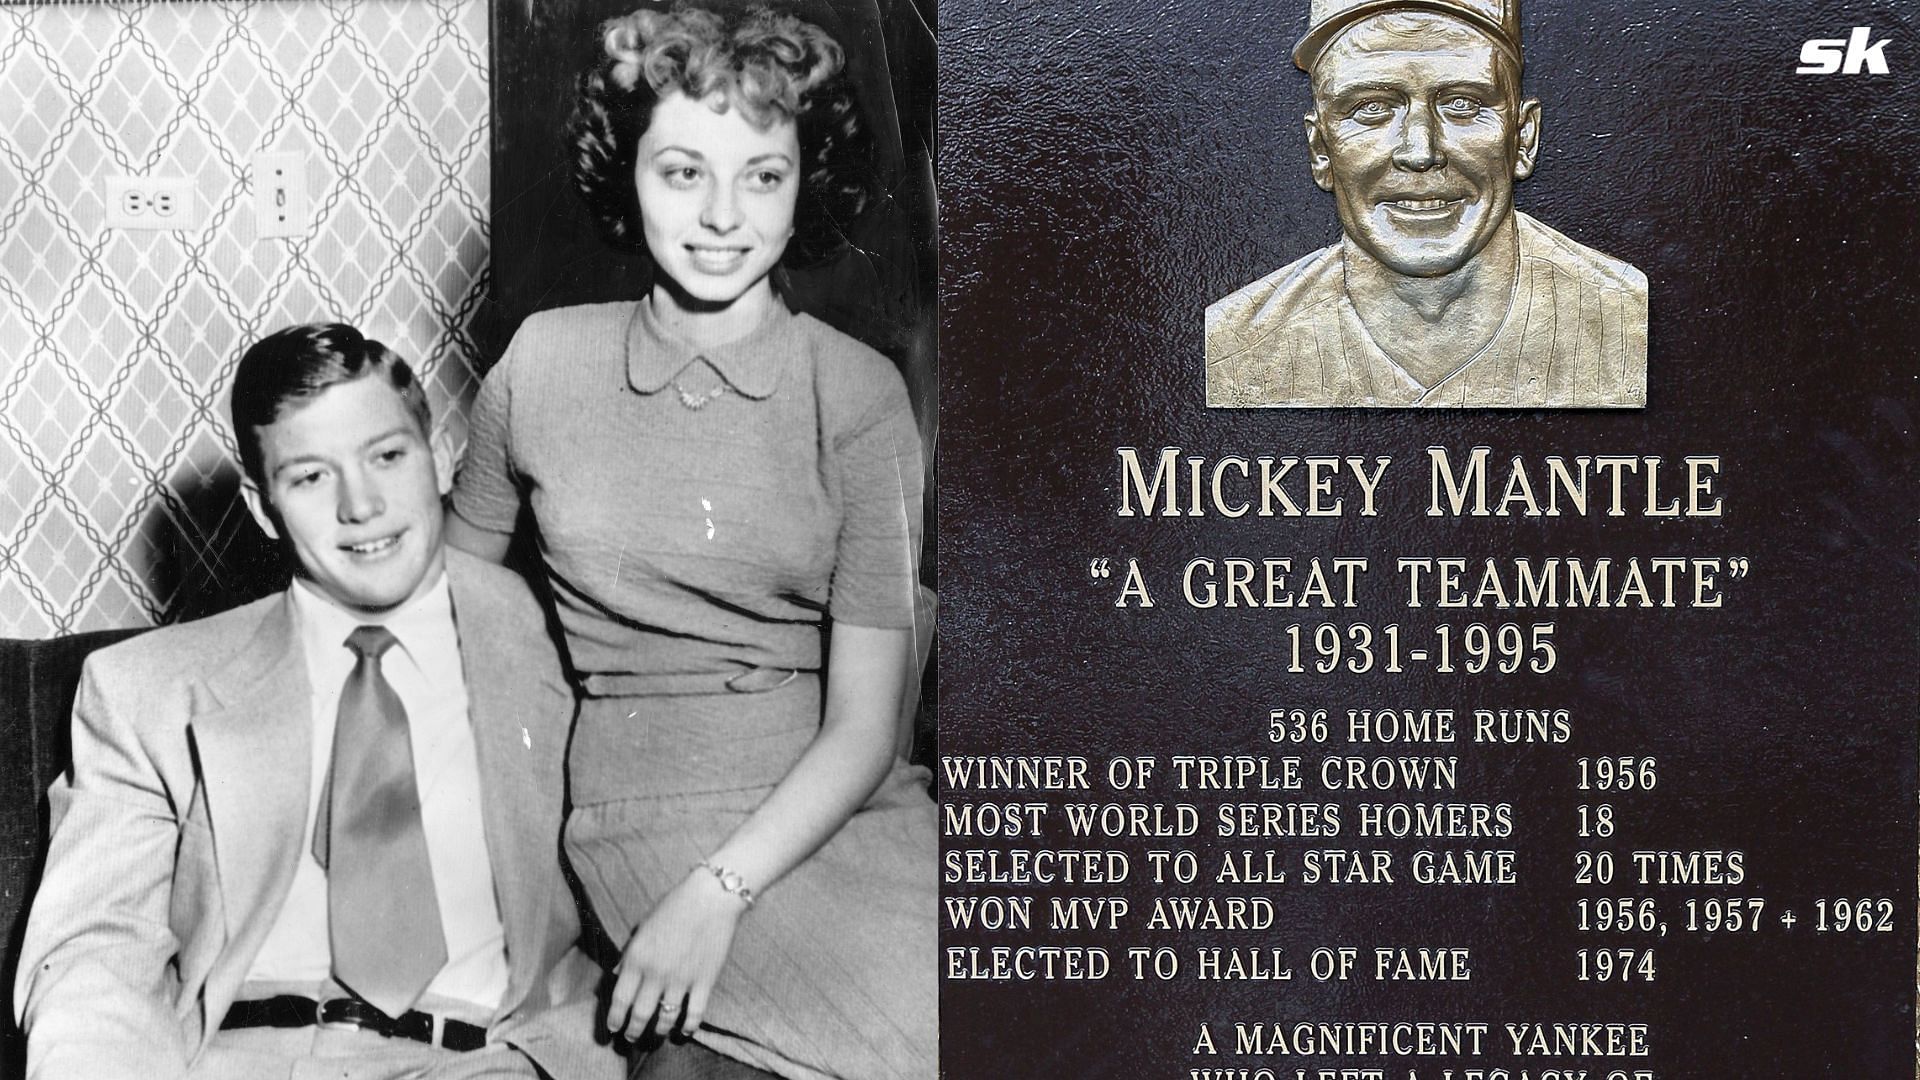 When former MLB legend Mickey Mantle's widow revealed her pain and